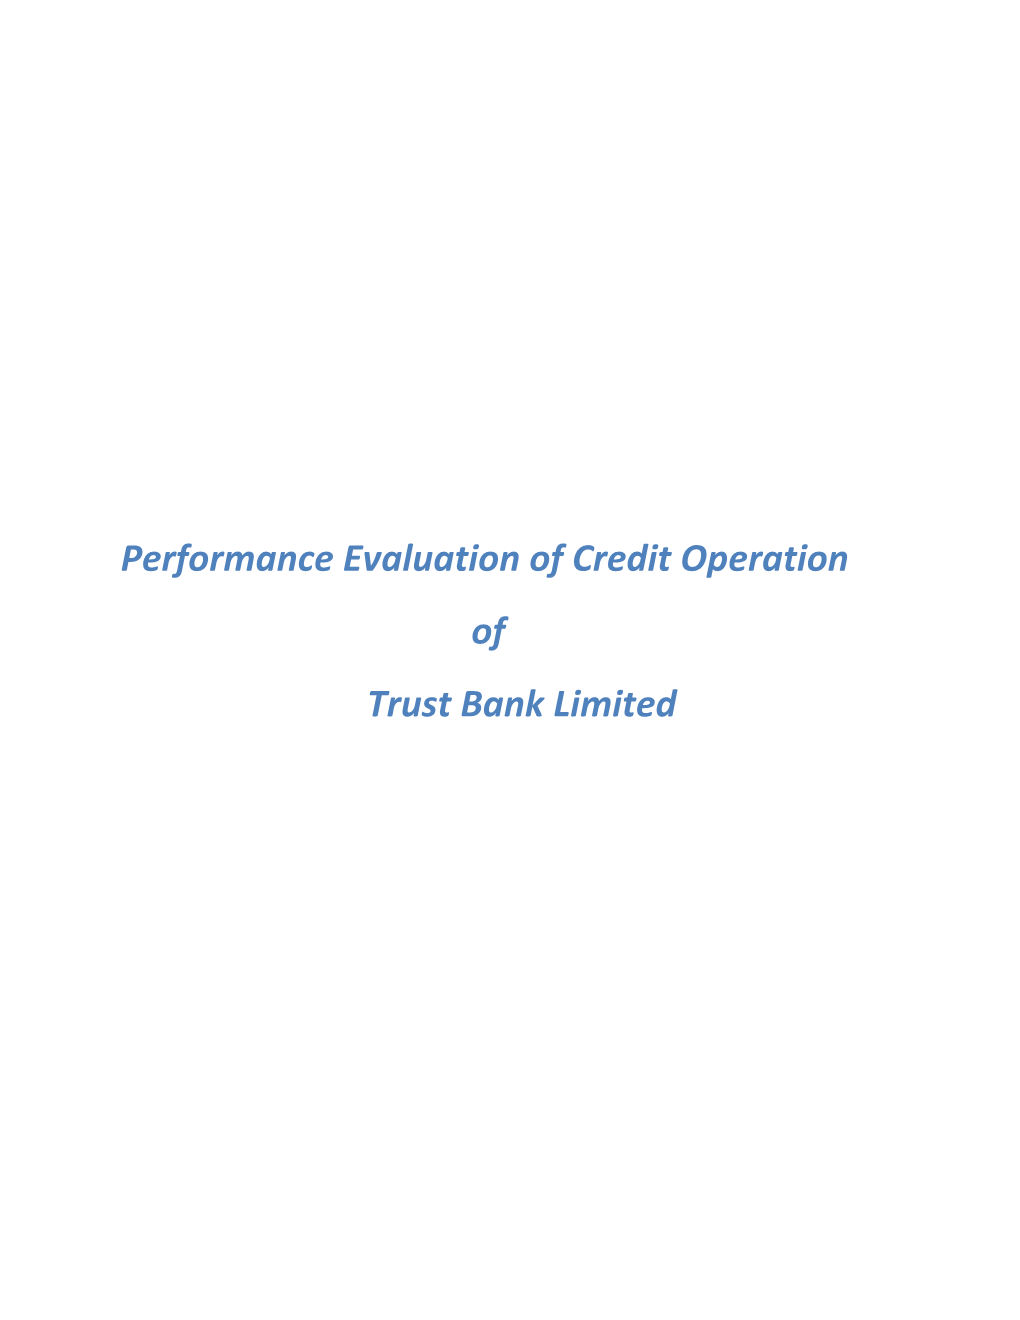 Performance Evaluation of Credit Operation of Trust Bank Limited